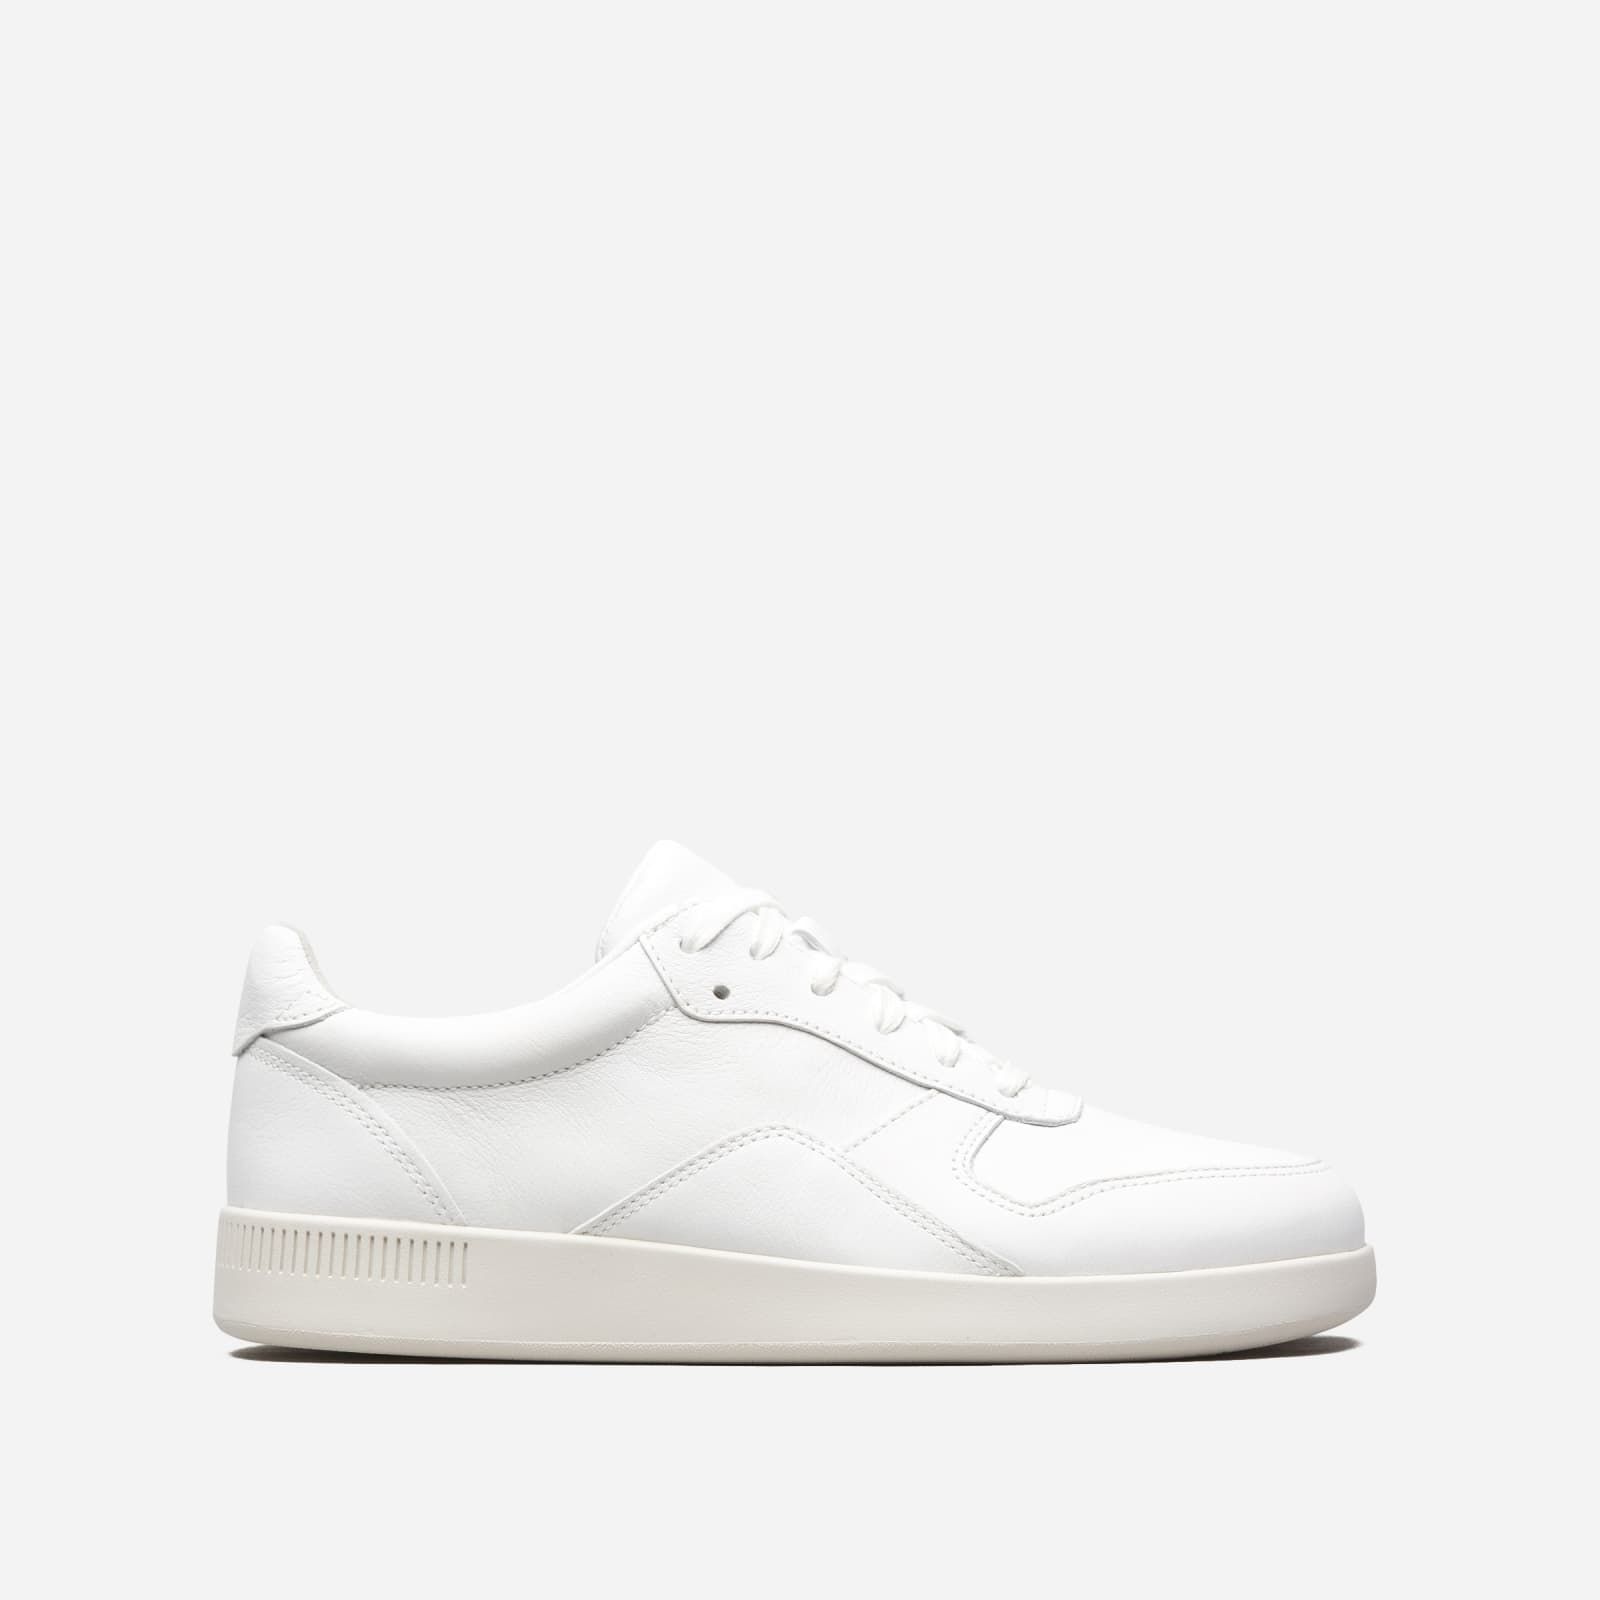 Women's Court Sneaker by Everlane in White, Size W10M8 | Everlane